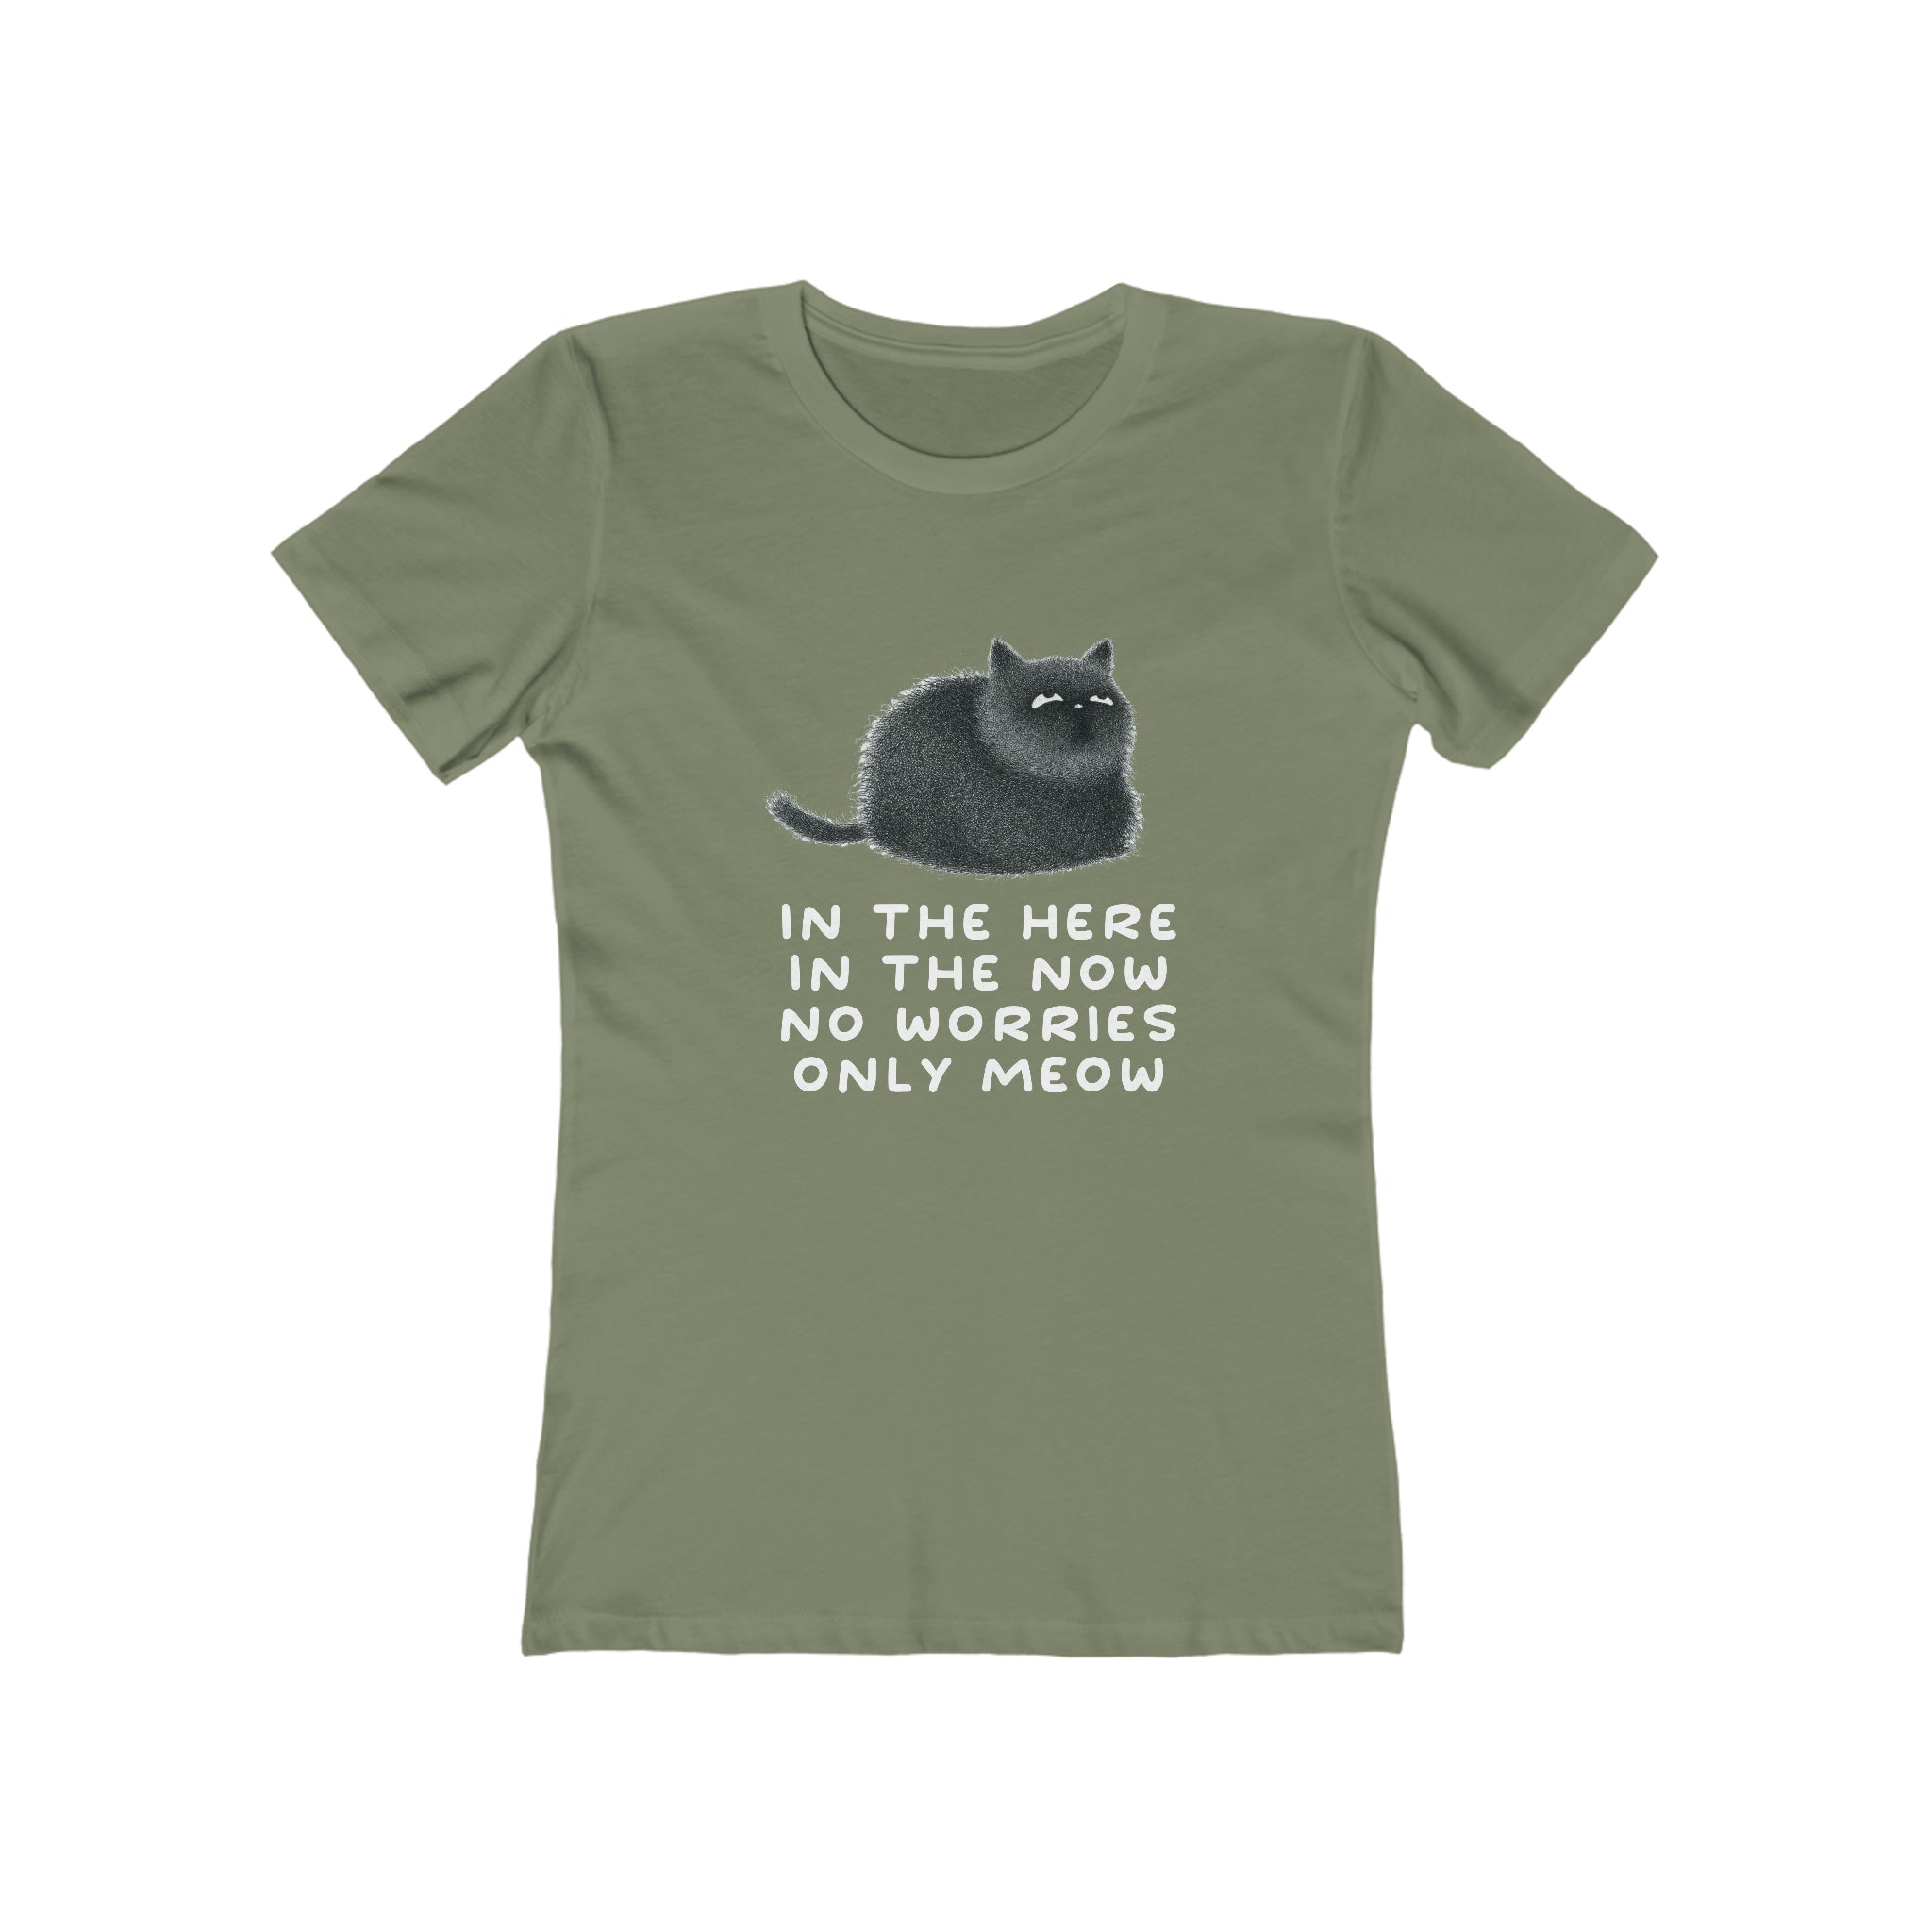 Only Meow : Women's 100% Cotton T-Shirt